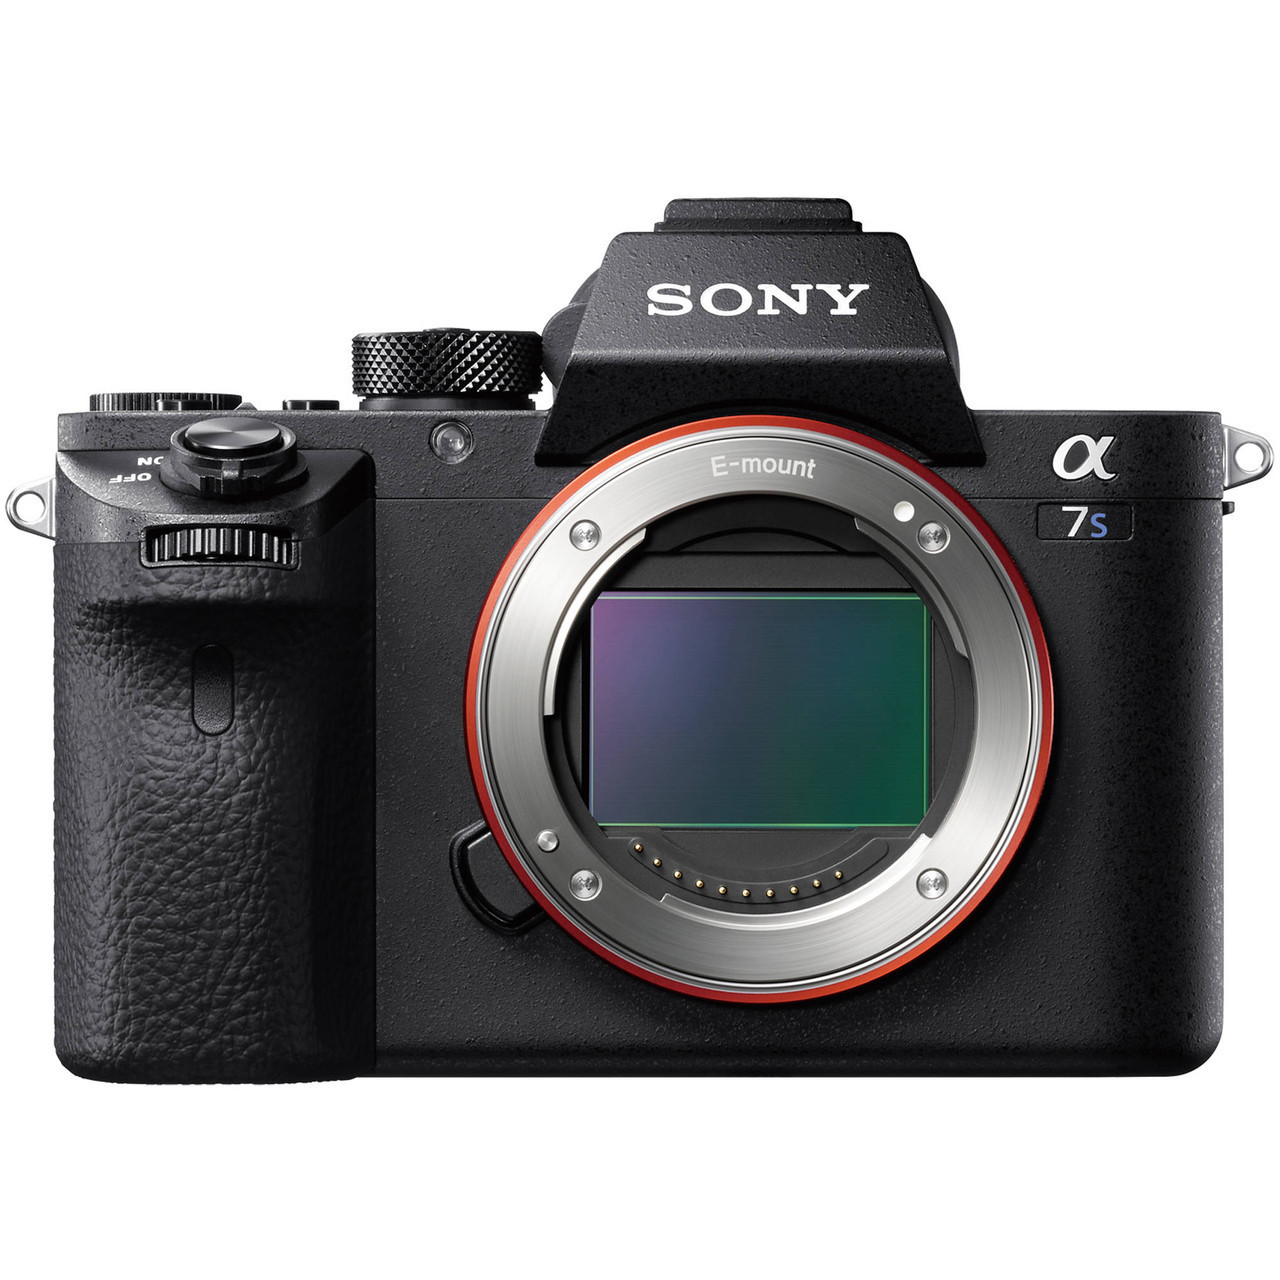 Capture The Extraordinary With The New Sony A7C II and Sony A7CR 